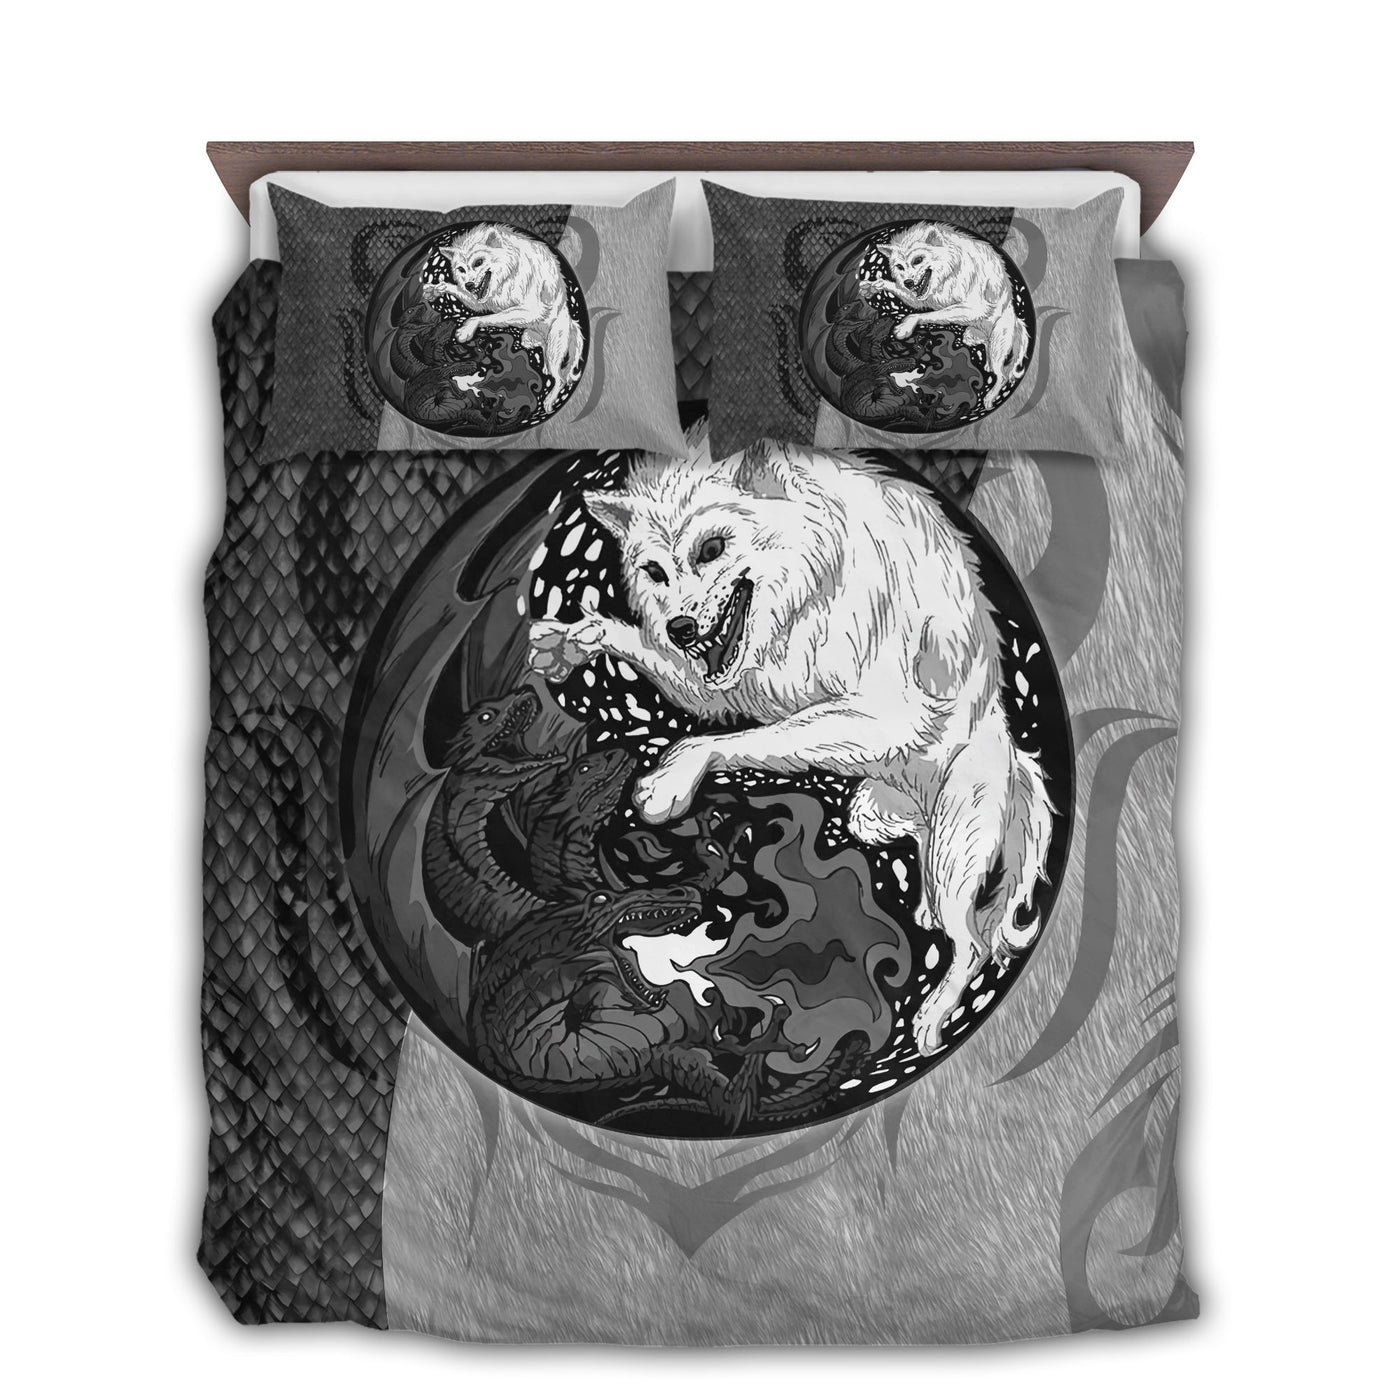 US / Twin (68" x 86") Dragon And Wolf Black And White Style - Bedding Cover - Owls Matrix LTD